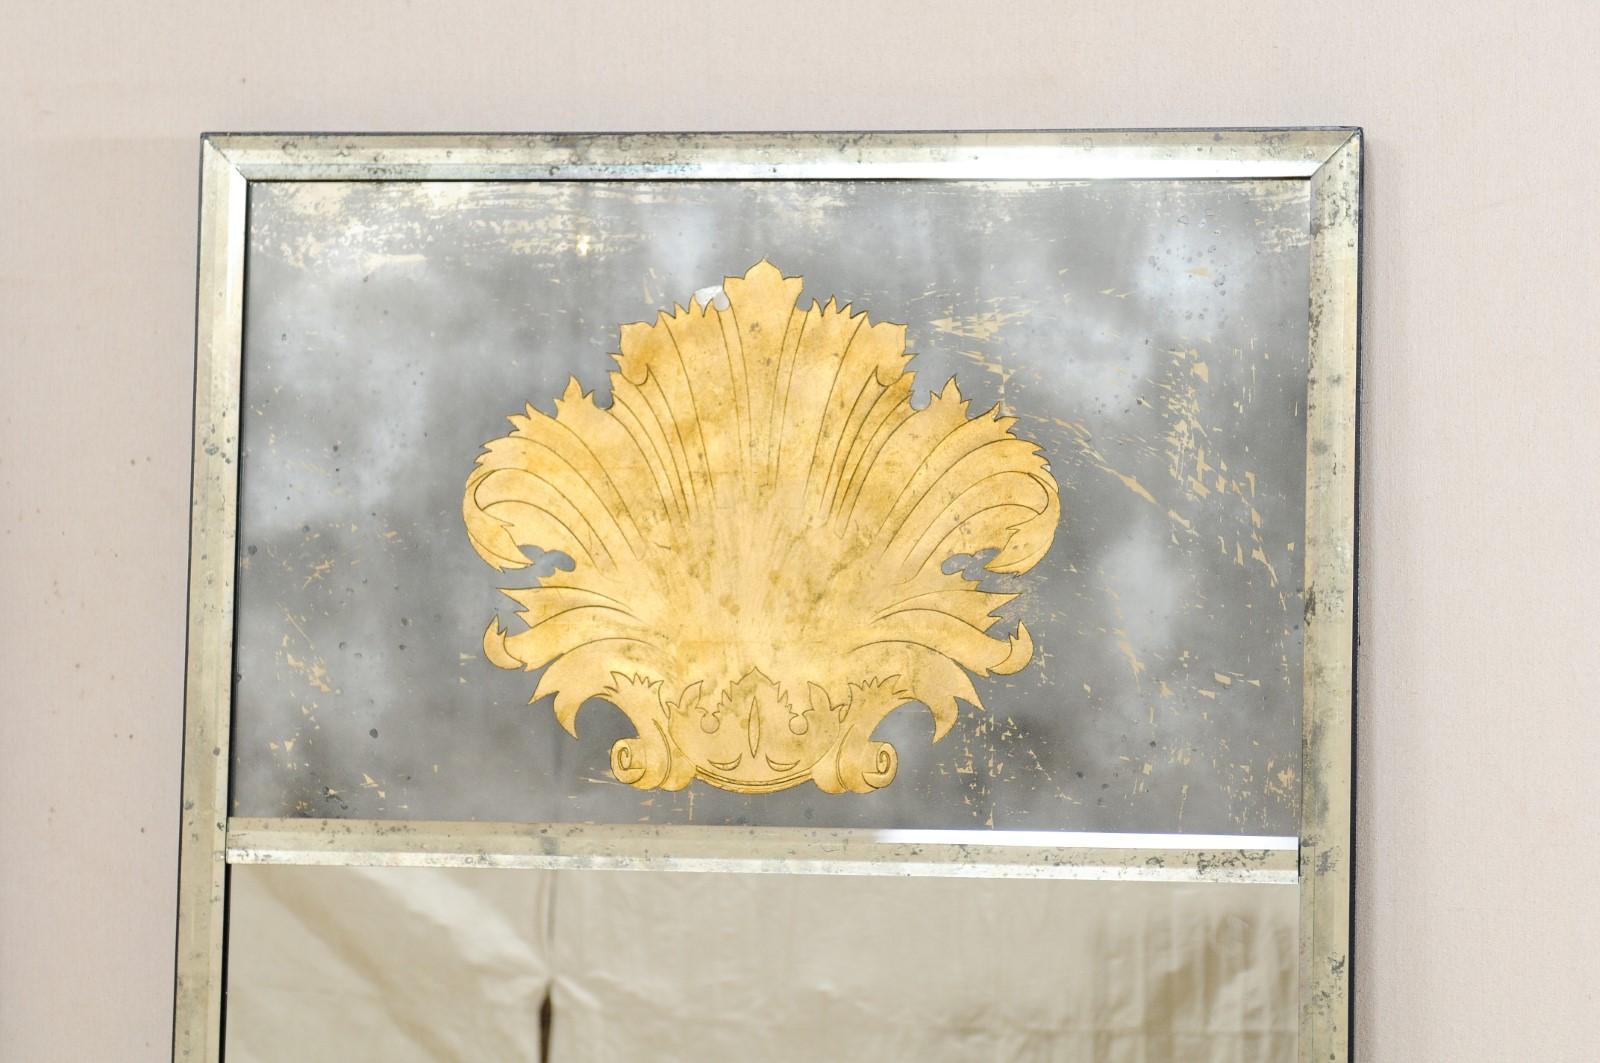 American Pair of 6.5 Ft. Tall Artisan Mirrors Adorned with Verre Églomisé Acanthus Leaves For Sale